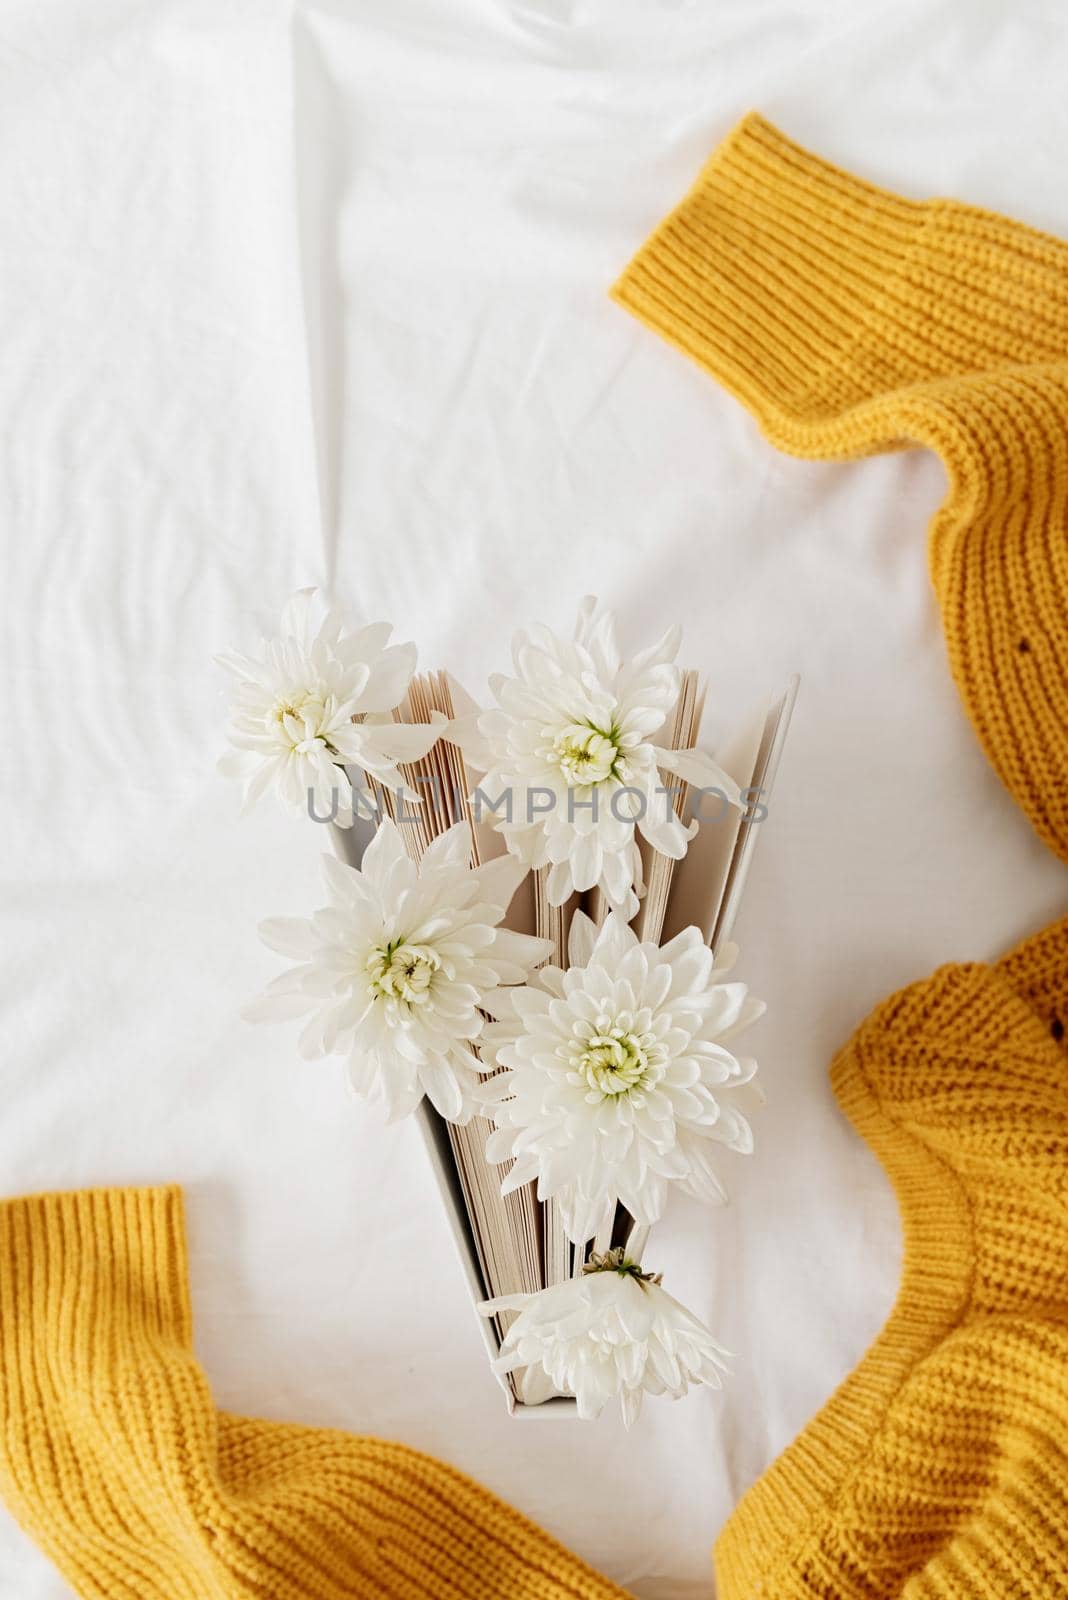 Top view of a book with white chrysanthemum flowers on white background with yellow sweater by Desperada